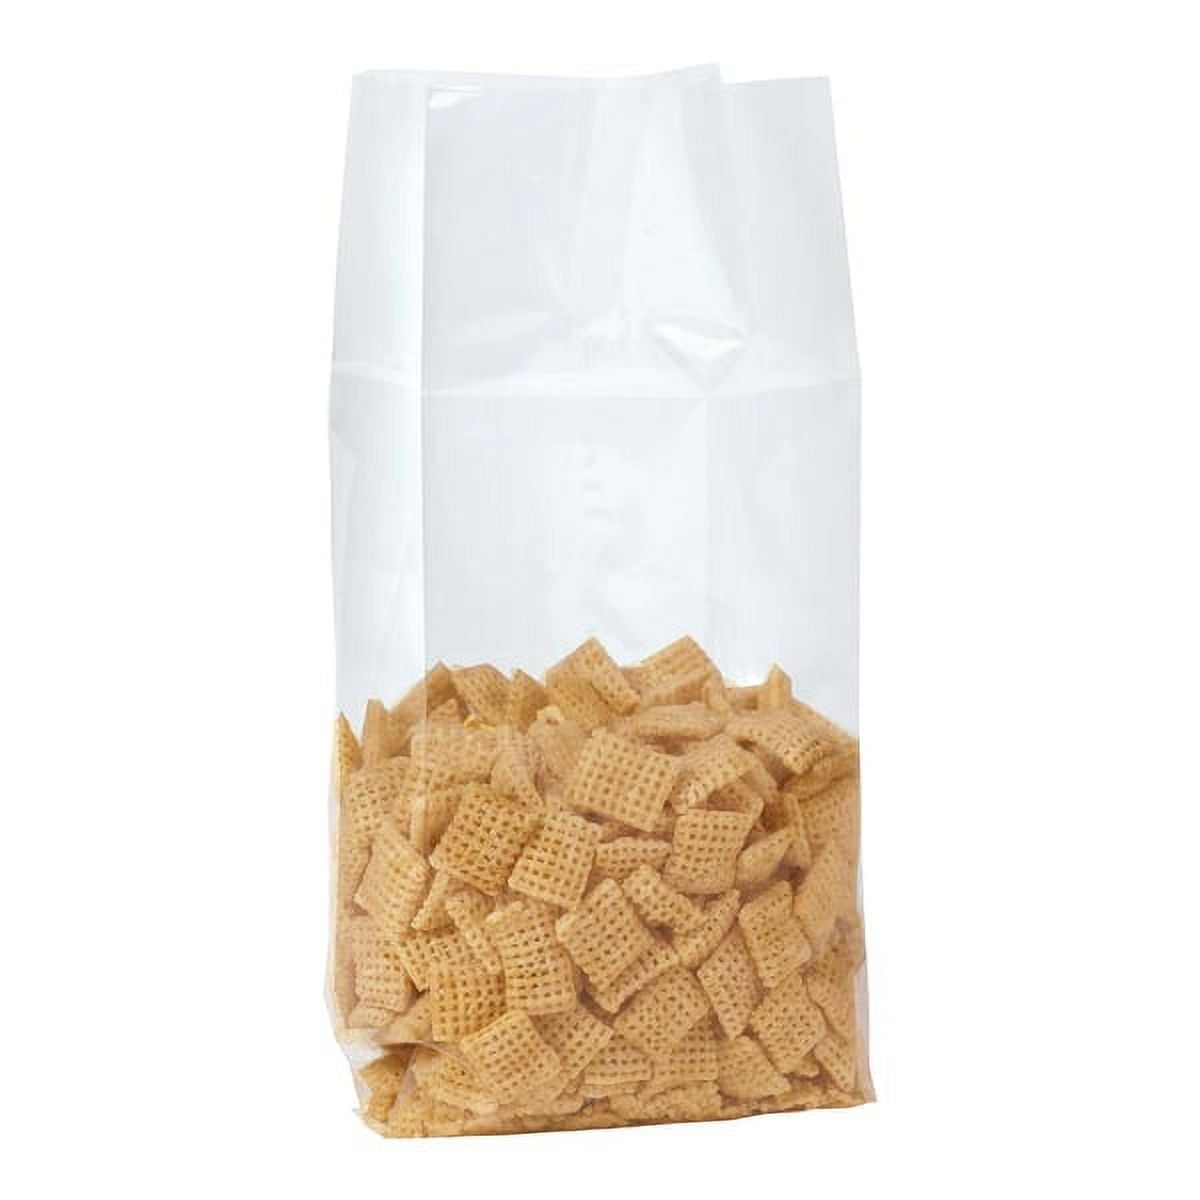 Pbg111 3.5 X 2 X 7.5 In. 1.5 Mil Gusseted Polypropylene Bags - Pack Of 2000